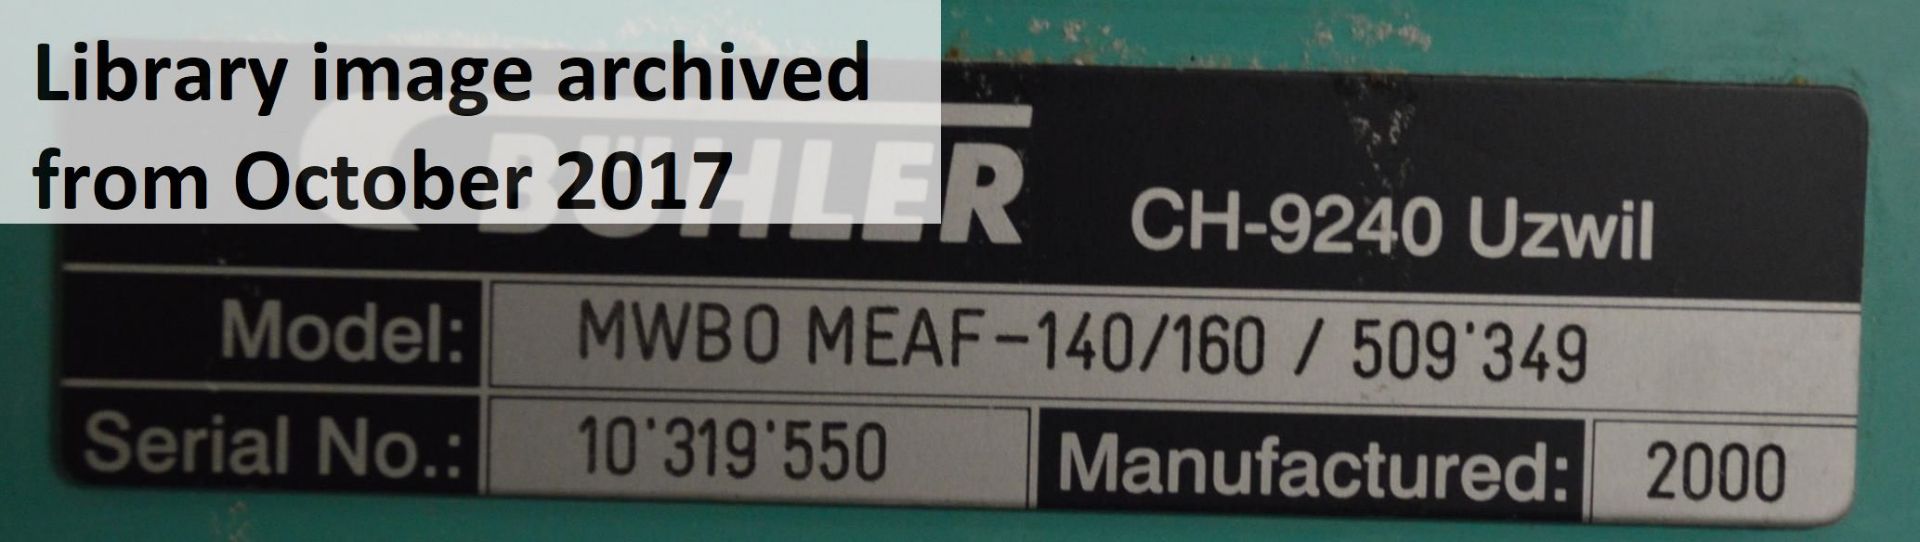 Buhler MWBO MEAF-140/160/509/349 DIFFERENTIAL WEIGHER, serial no. 10319550, with Danfoss VLT - Image 4 of 5